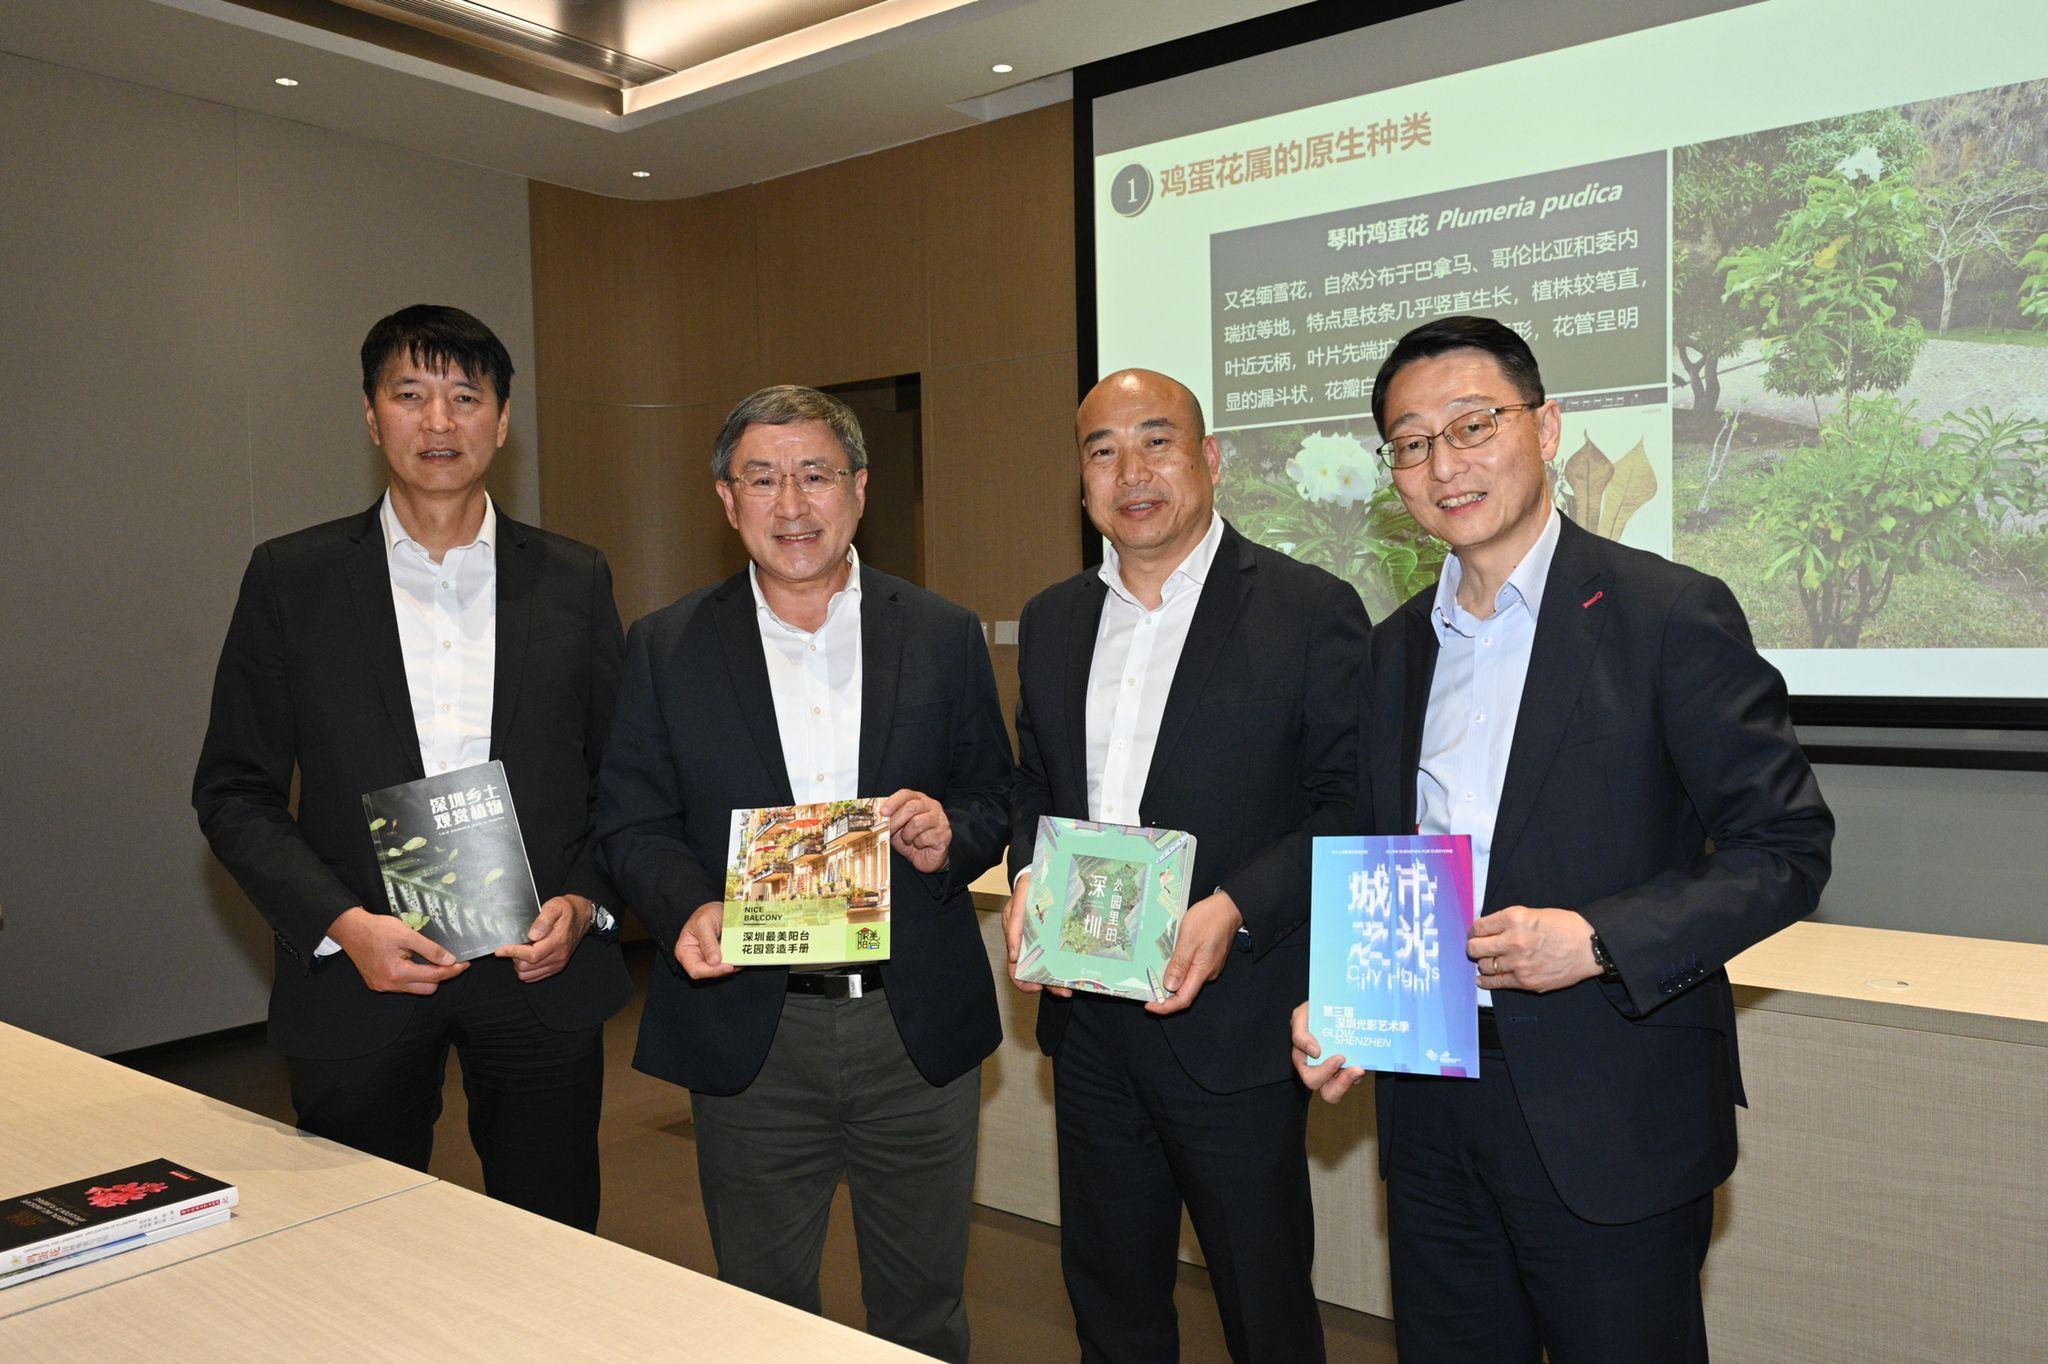 The Deputy Chief Secretary for Administration, Mr Cheuk Wing-hing (second left), together with the Director of Highways, Mr Jimmy Chan (first left), and the Director of Leisure and Cultural Services, Mr Vincent Liu (first right), is pictured with the Director-General of the Urban Administration and Law Enforcement Bureau of Shenzhen Municipality, Mr Zhang Guohong, after their meeting in Shenzhen today (March 23).